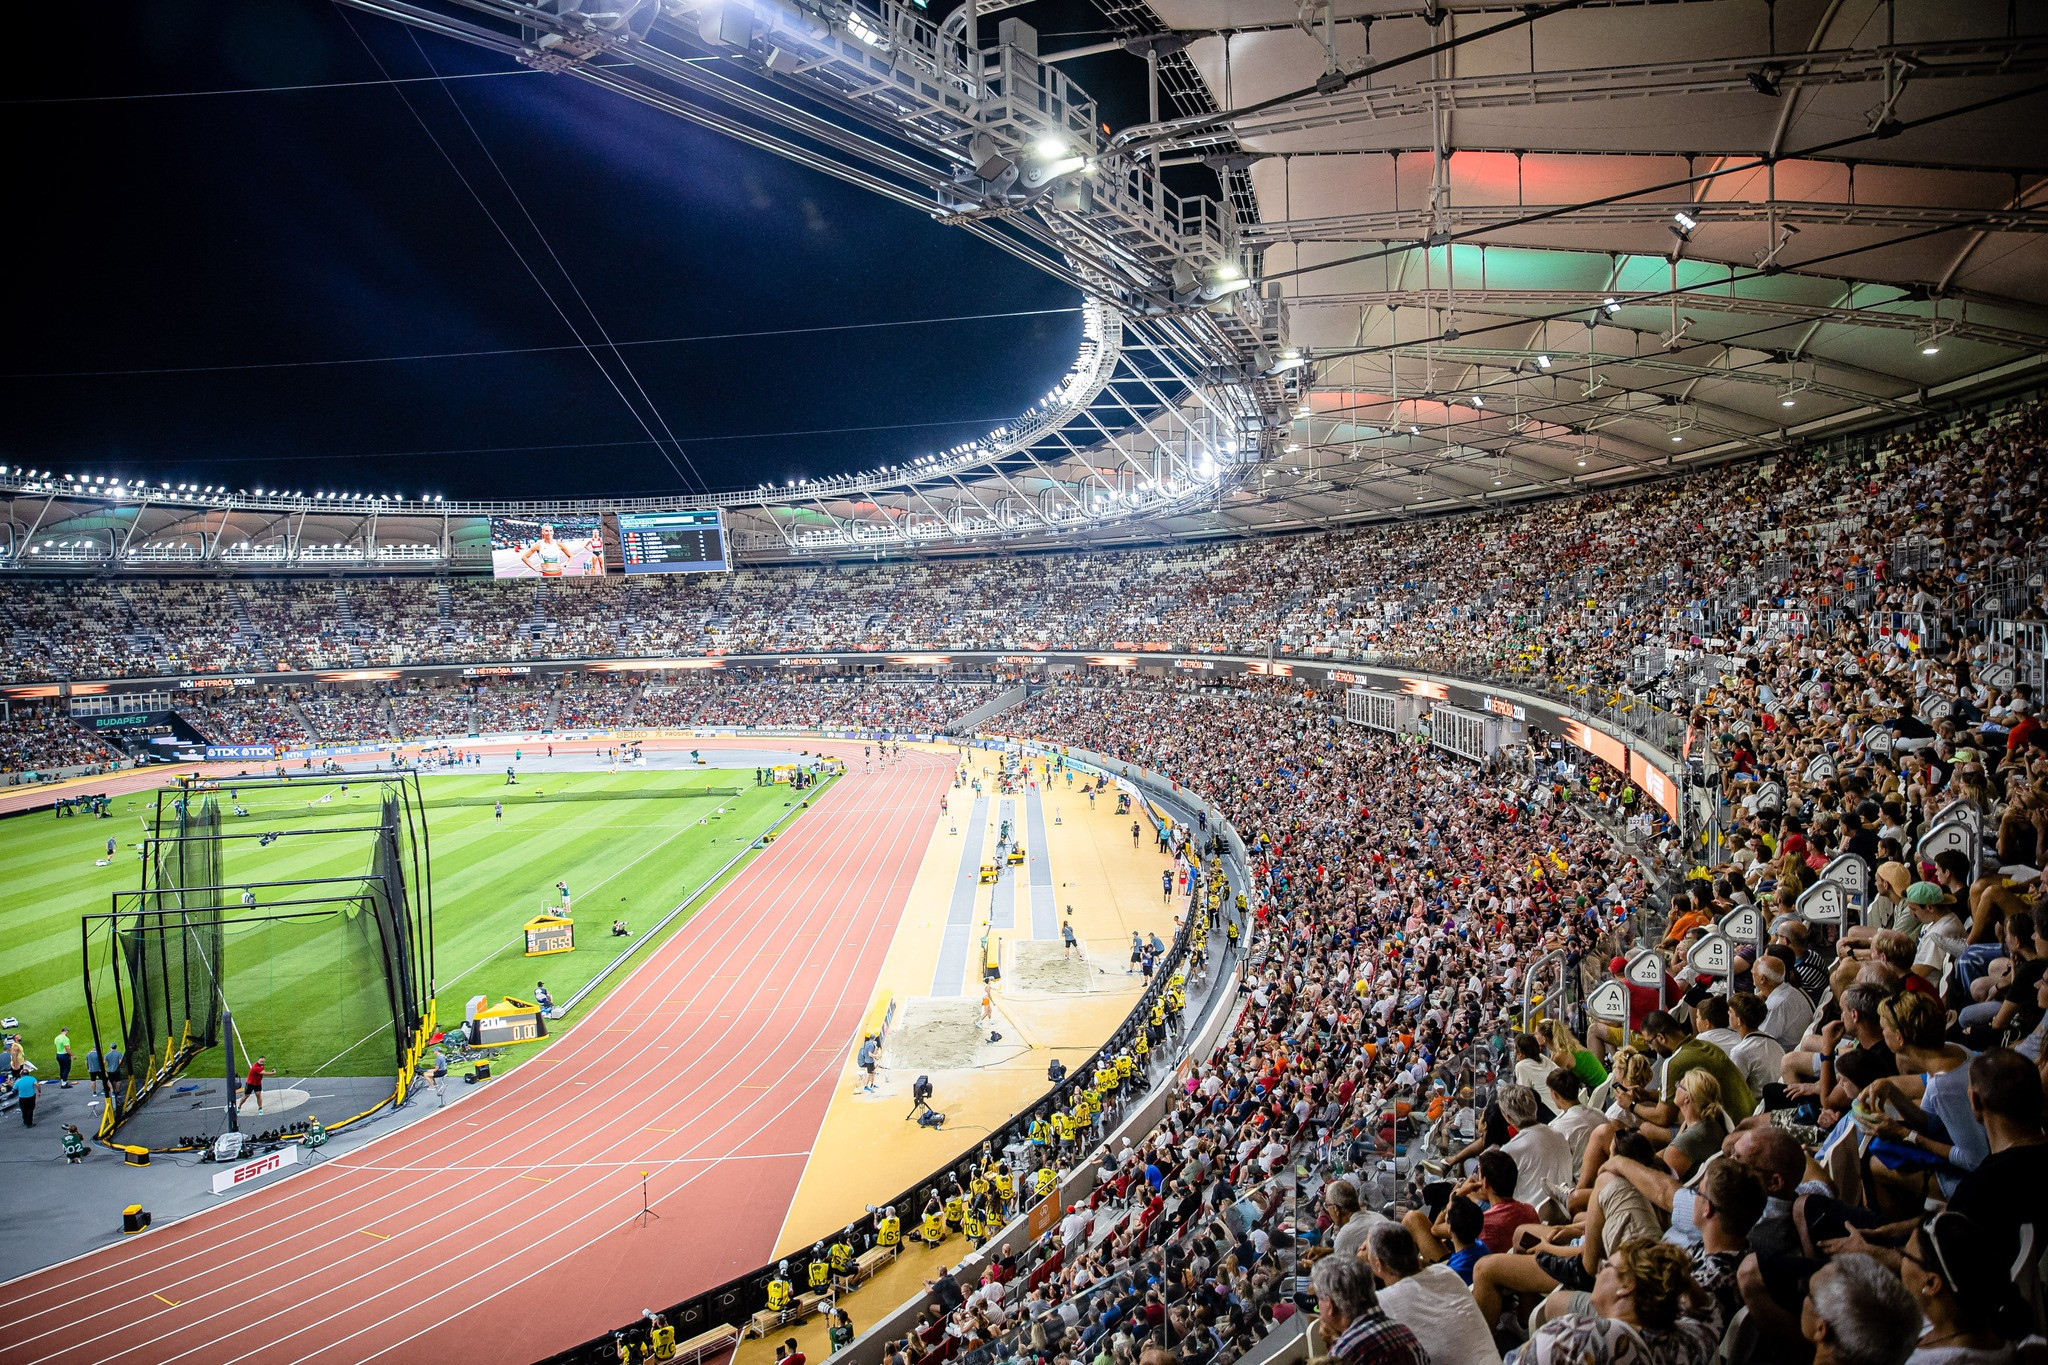 Spectators who attended this year's World Athletics Championships in Budapest have given the event high marks in a survey conducted by Nielsen ©Budapest 2023